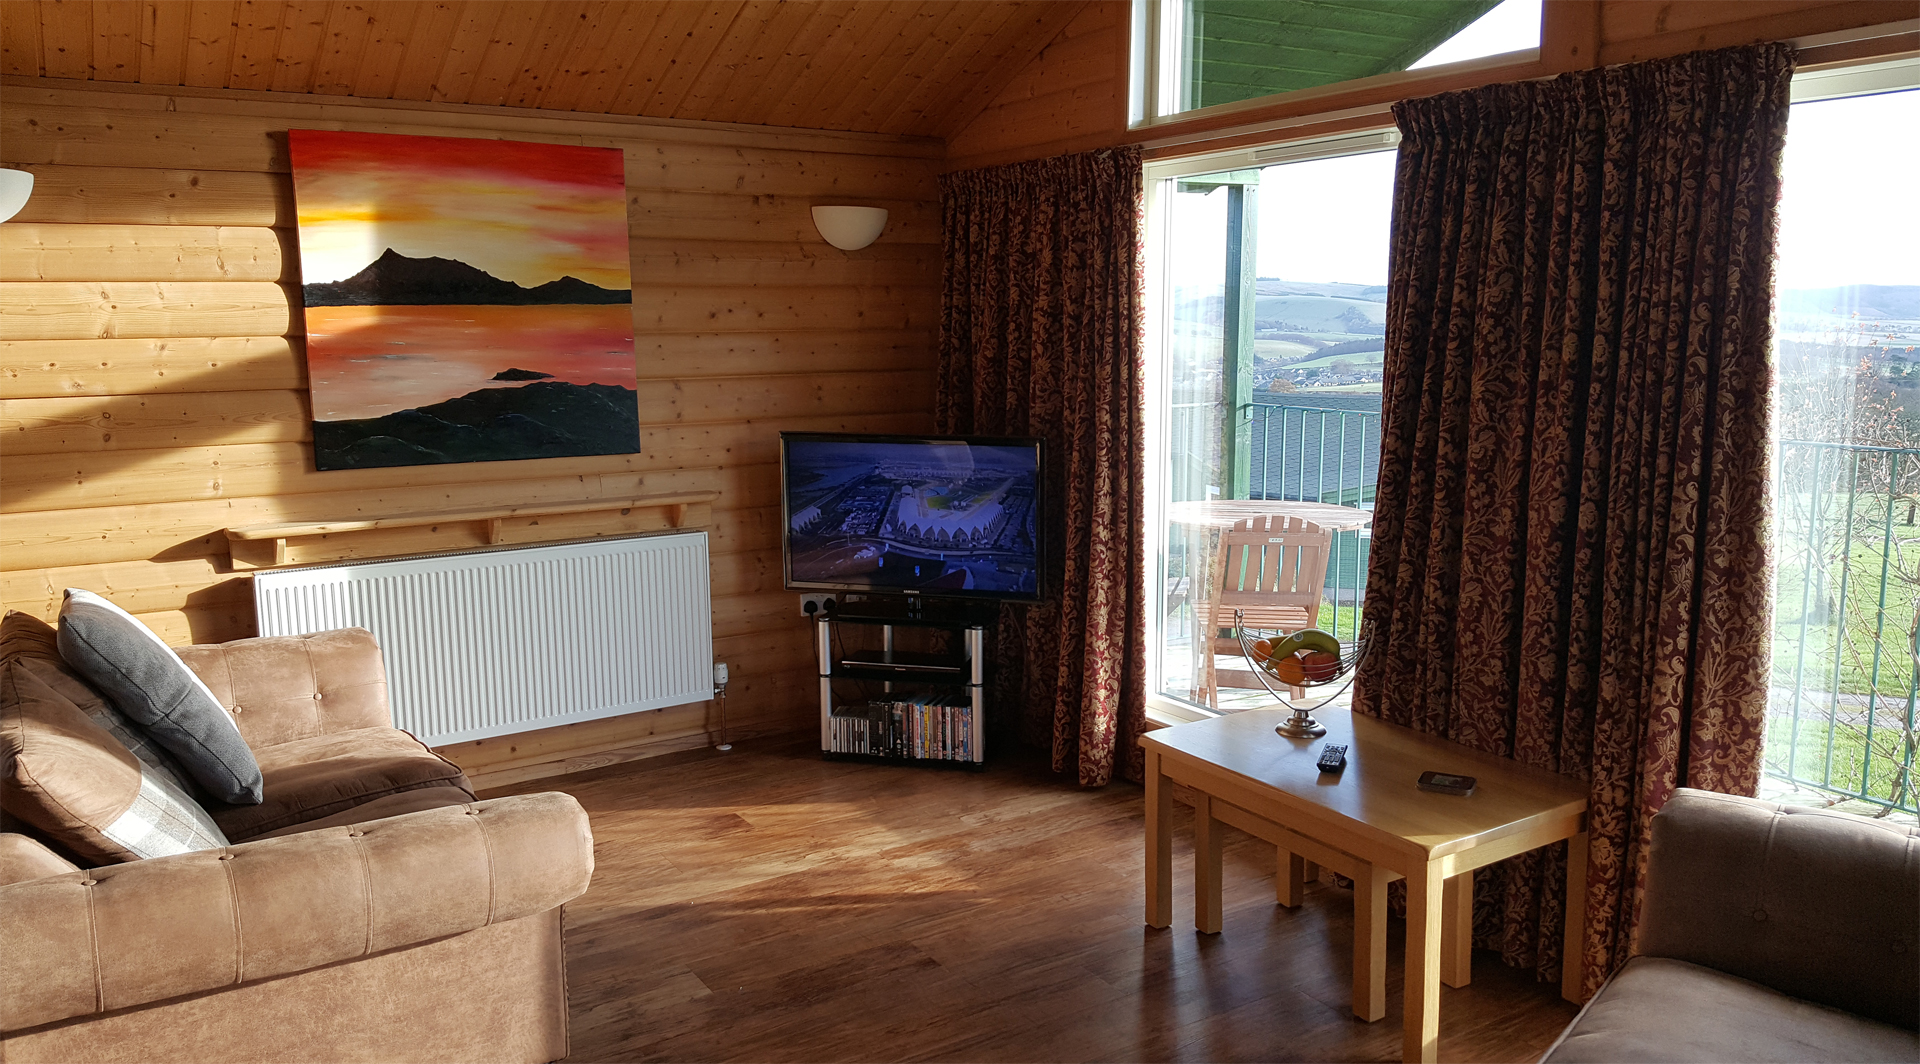 The living area with view out the large windows in The Ramsay at Airhouses Luxury Self Catering Lodges in Scottish Borders 